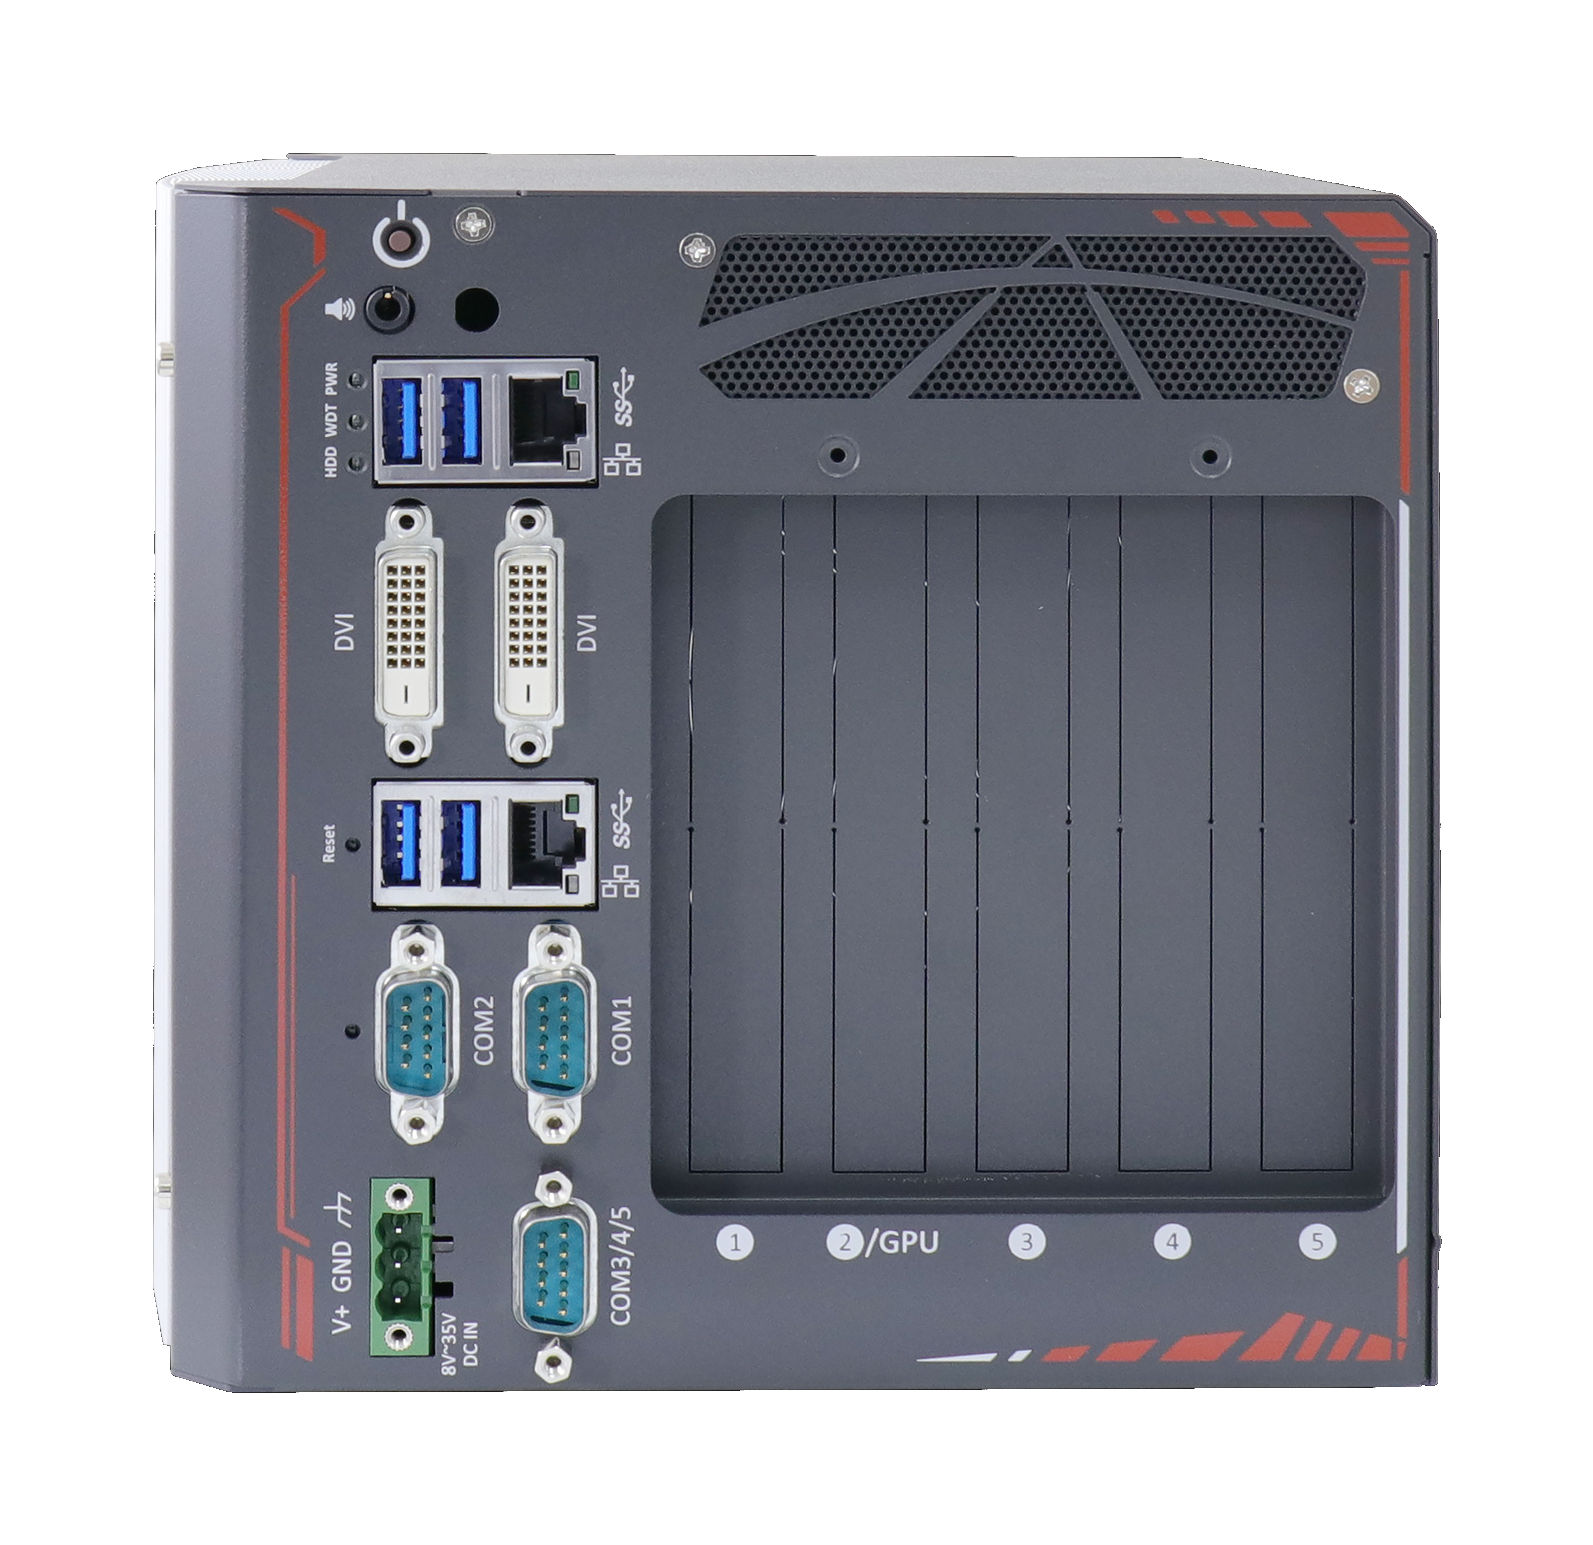 Nuvo-8041 front I/O